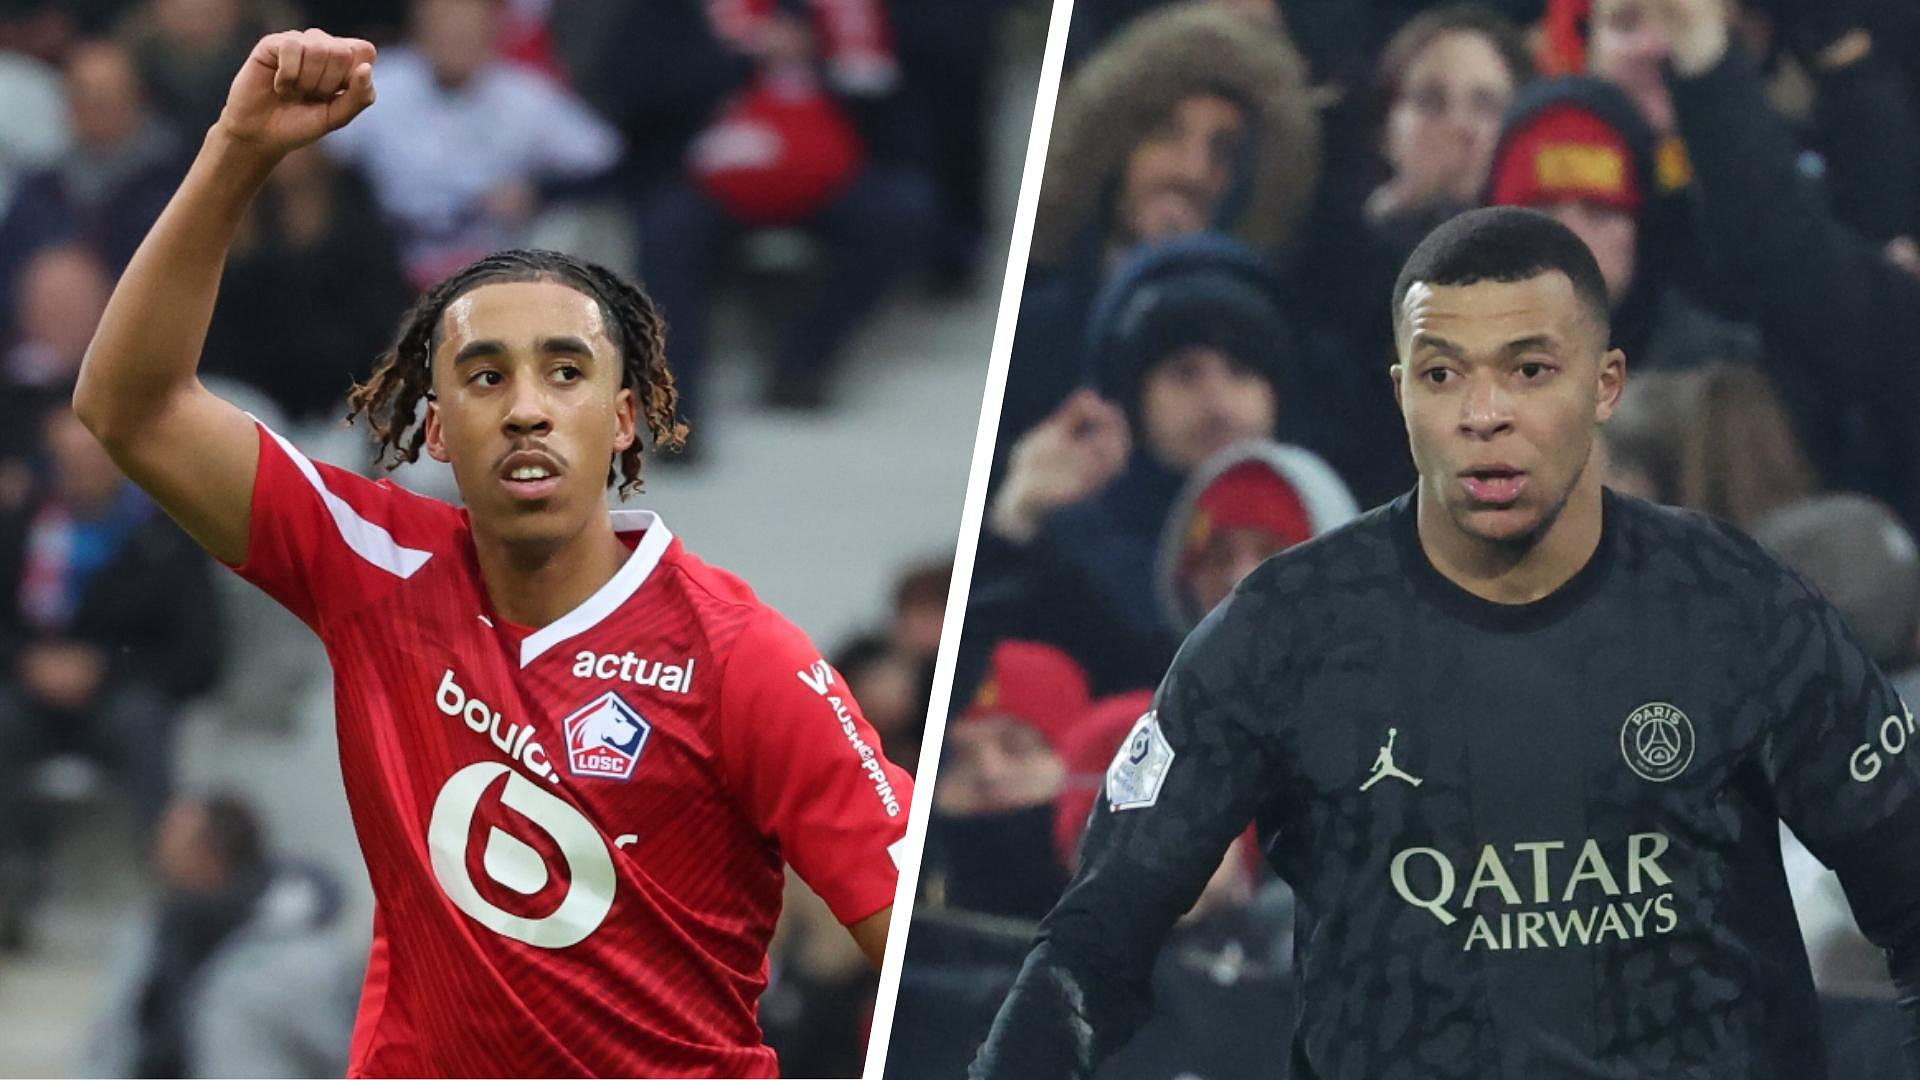 Mercato: PSG insists on Yoro and seeks to strengthen Mbappé... The hot issues of the day